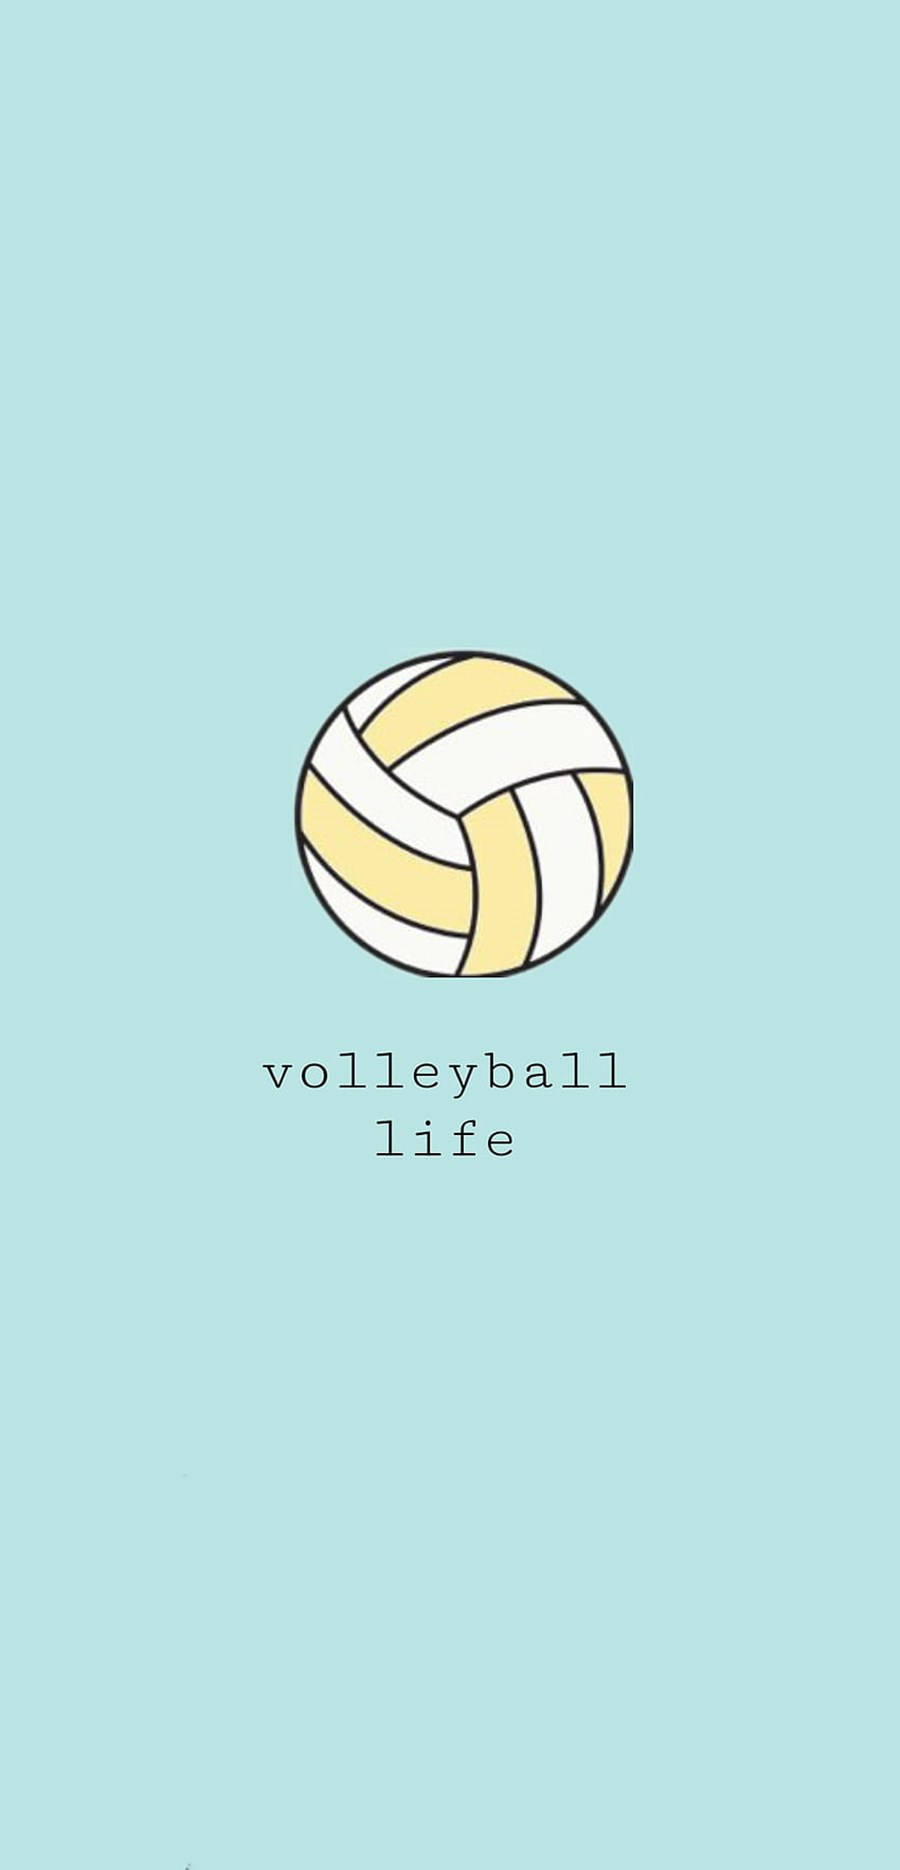 Volleyball wallpaper by erfe  Download on ZEDGE  820f